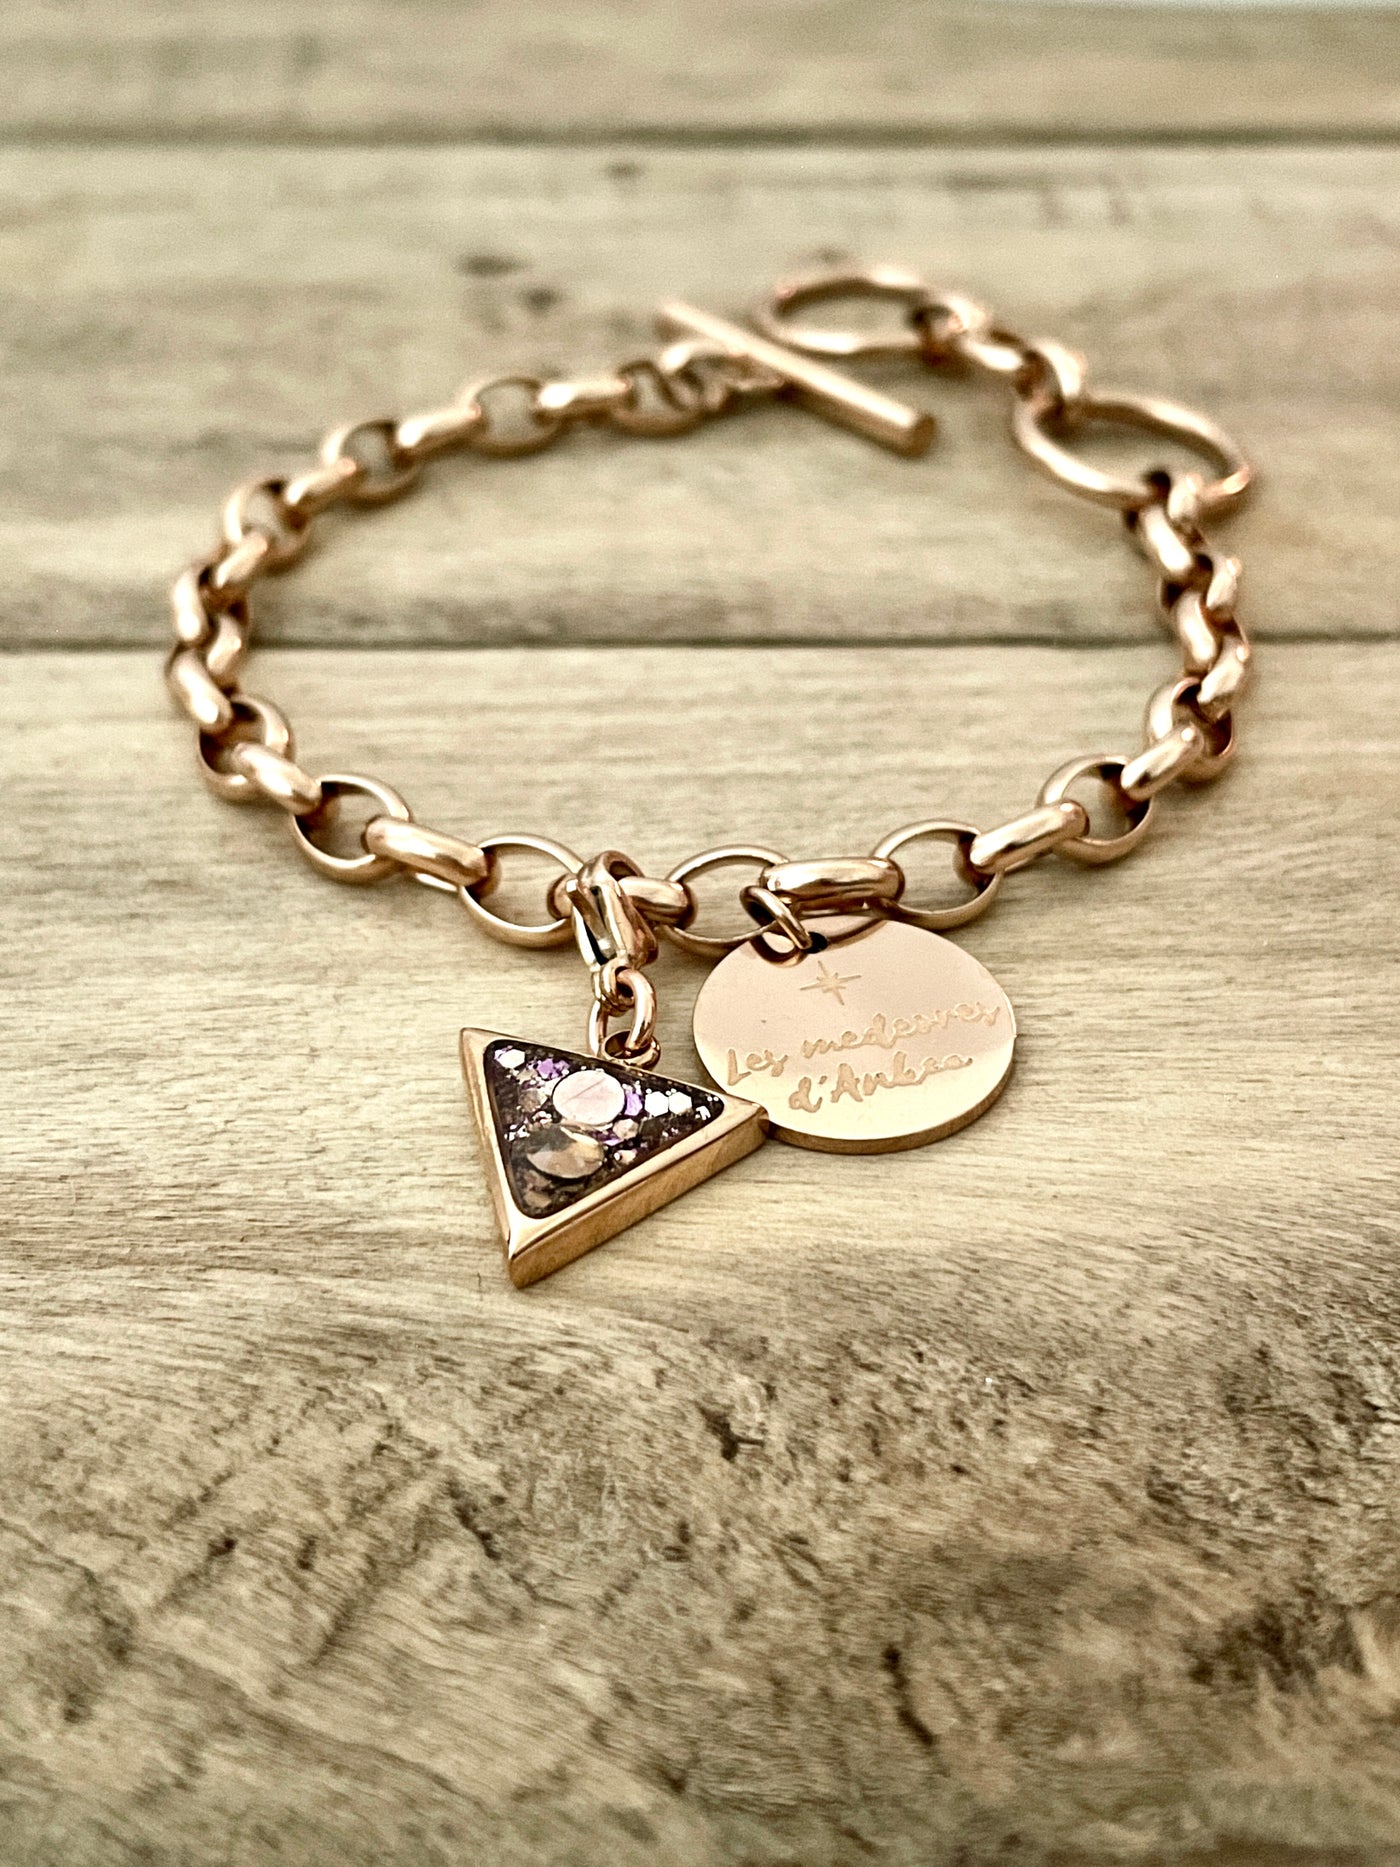 Medeore rose gold Triangle BE YOURSELF charm (charm sold alone)